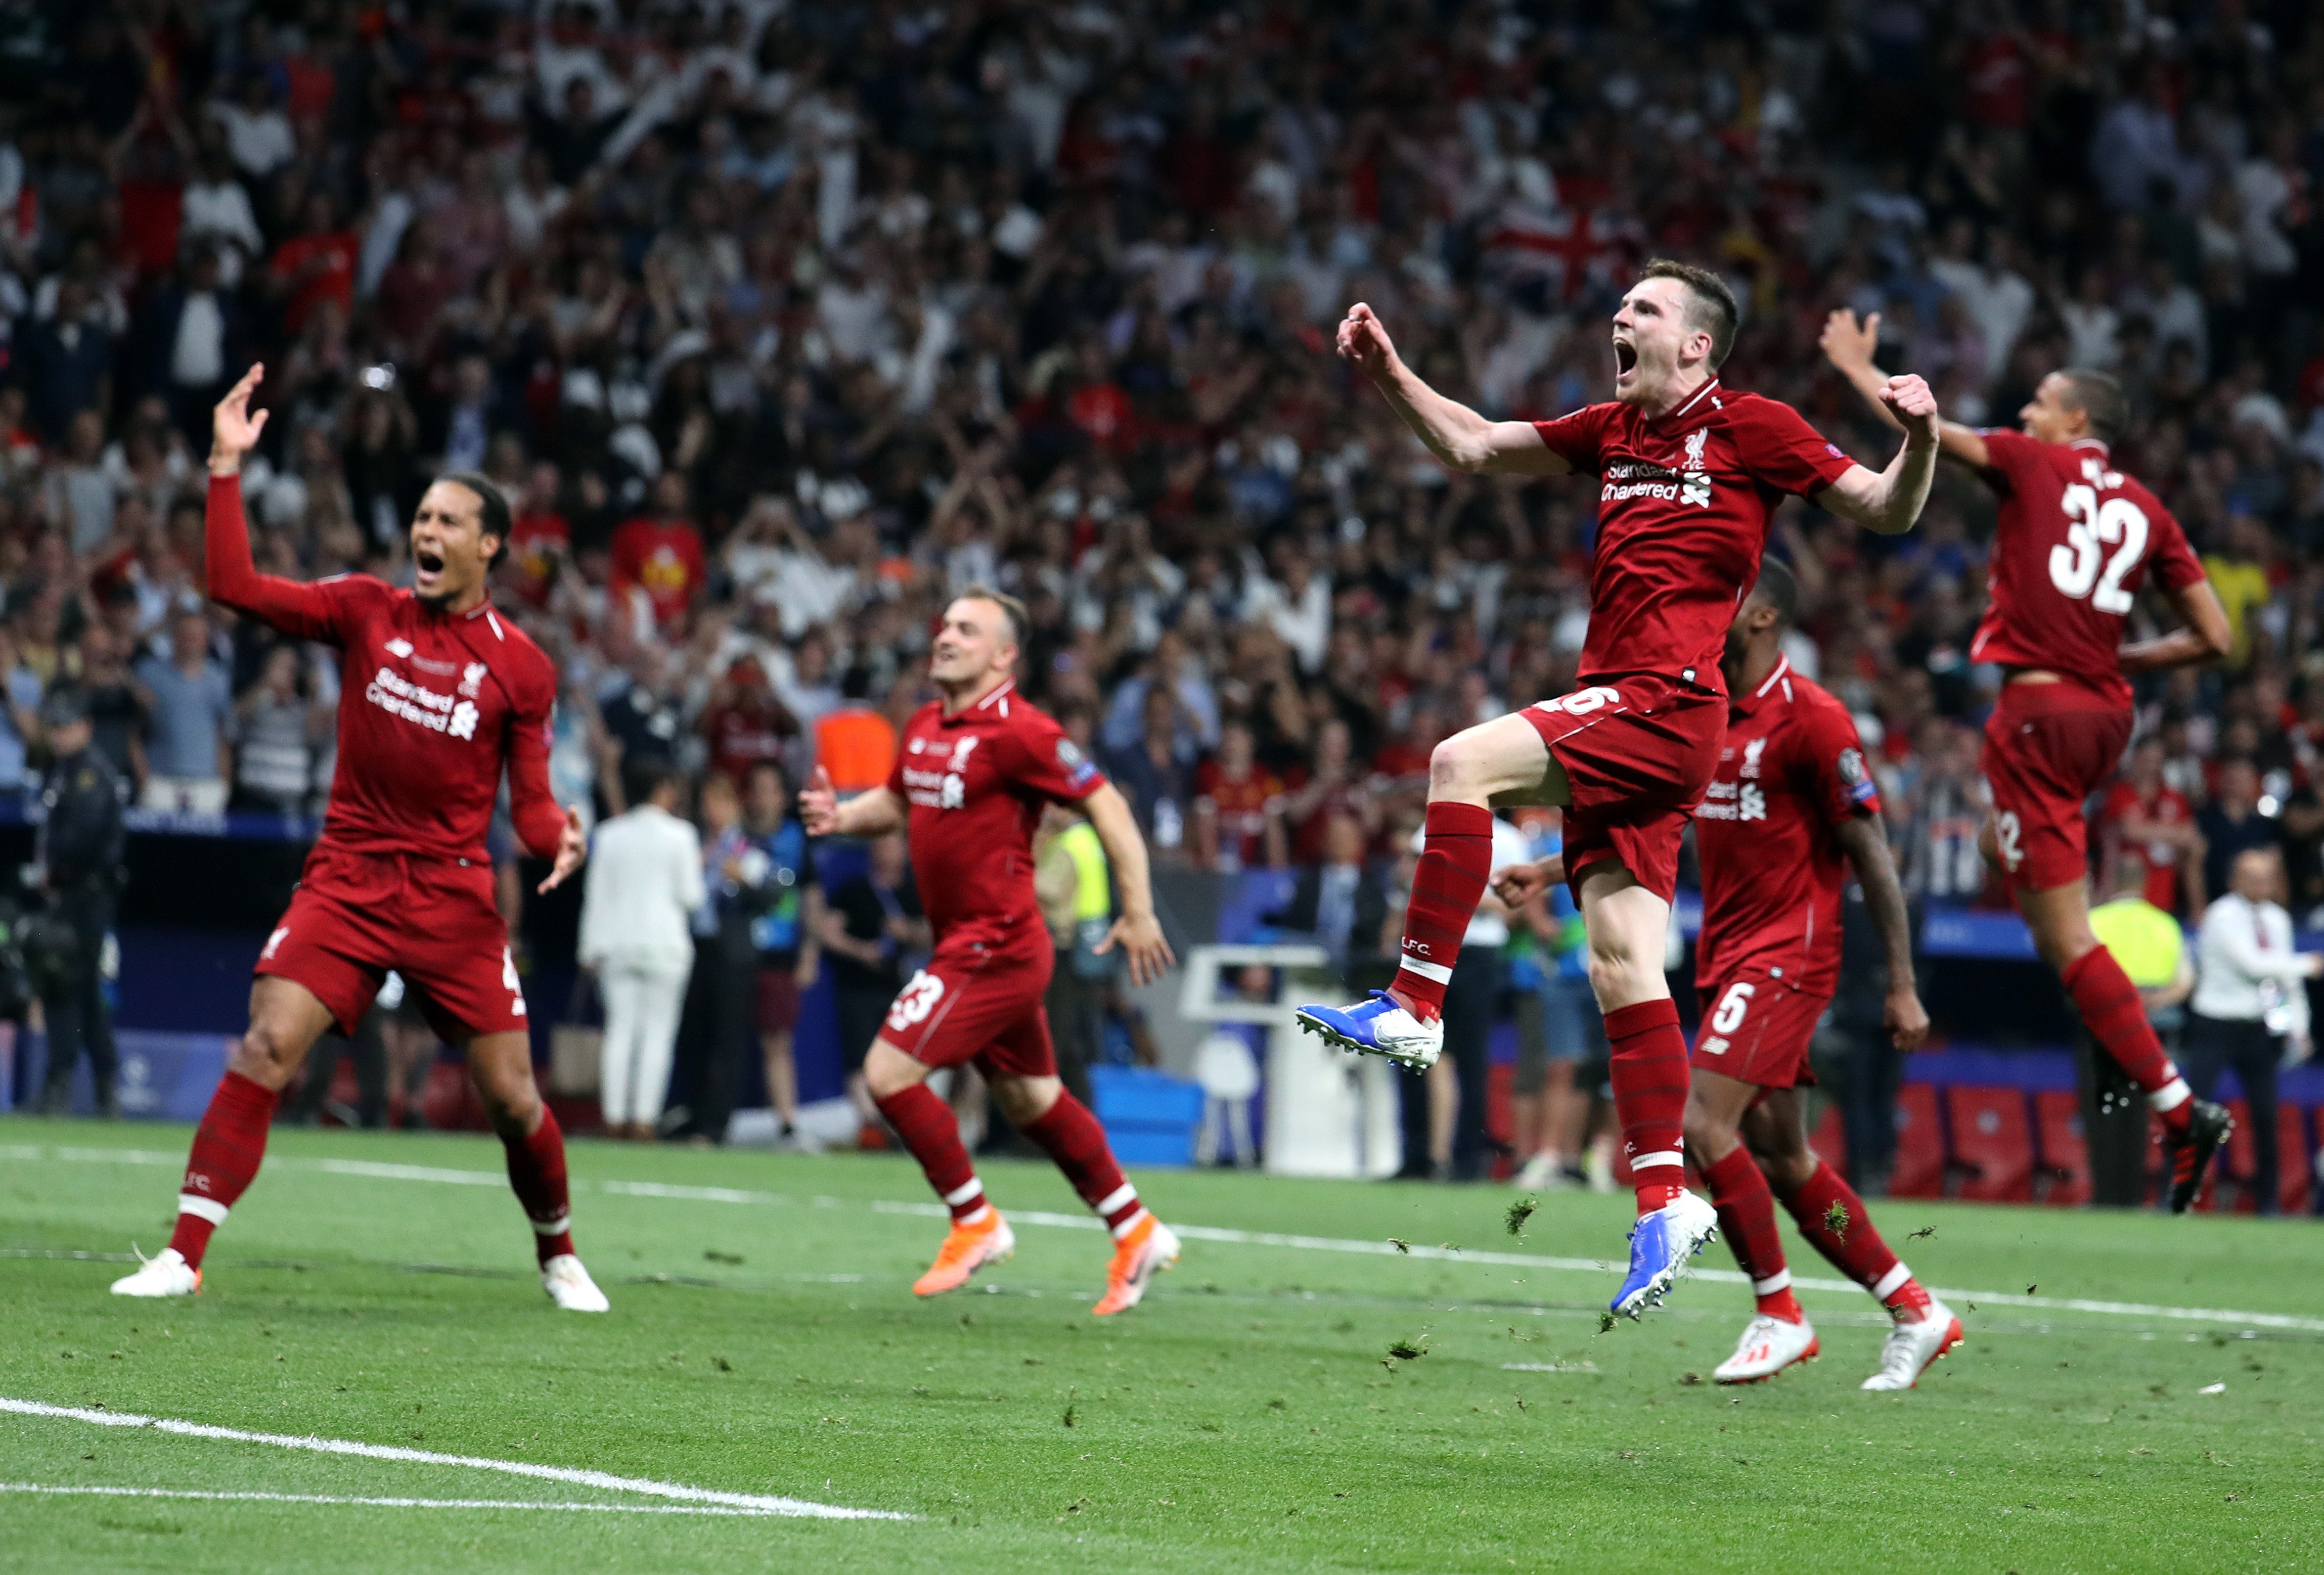 champions league final tickets price 2019